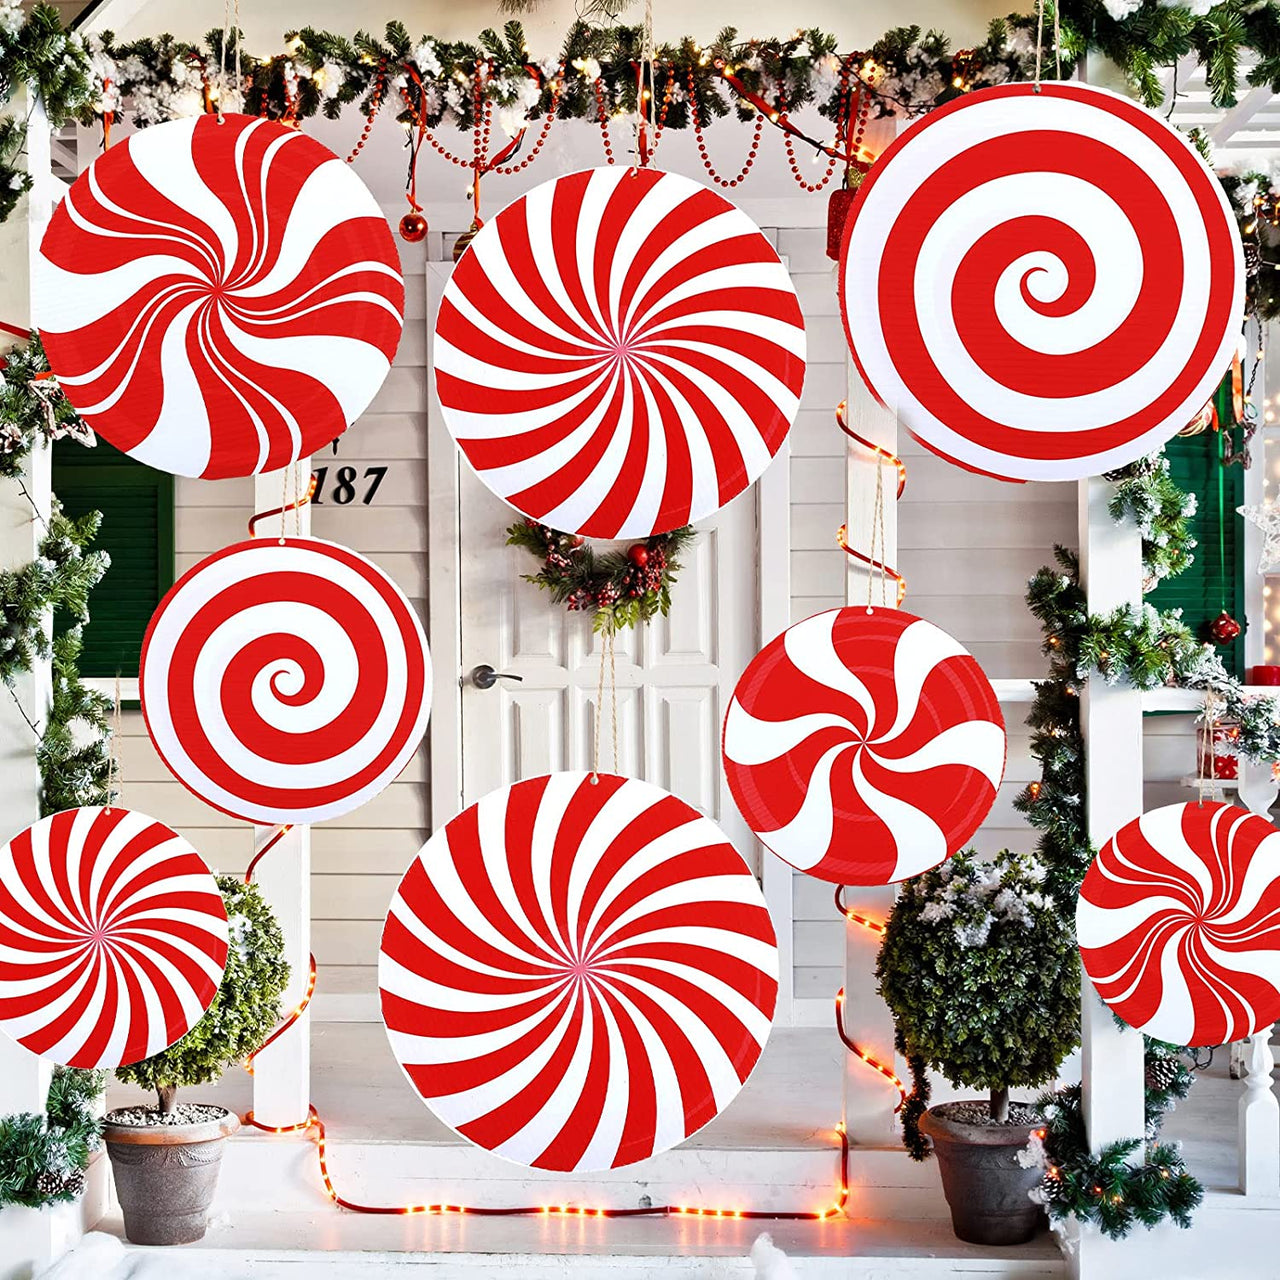 16 Pcs Outdoor Holiday and Christmas Hanging Porch and Tree Yard Lawn Decoration Christmas Large Candy Yard Decorations Outdoor Lawn Decoration Candy Hanging Ornaments for Holiday Decor